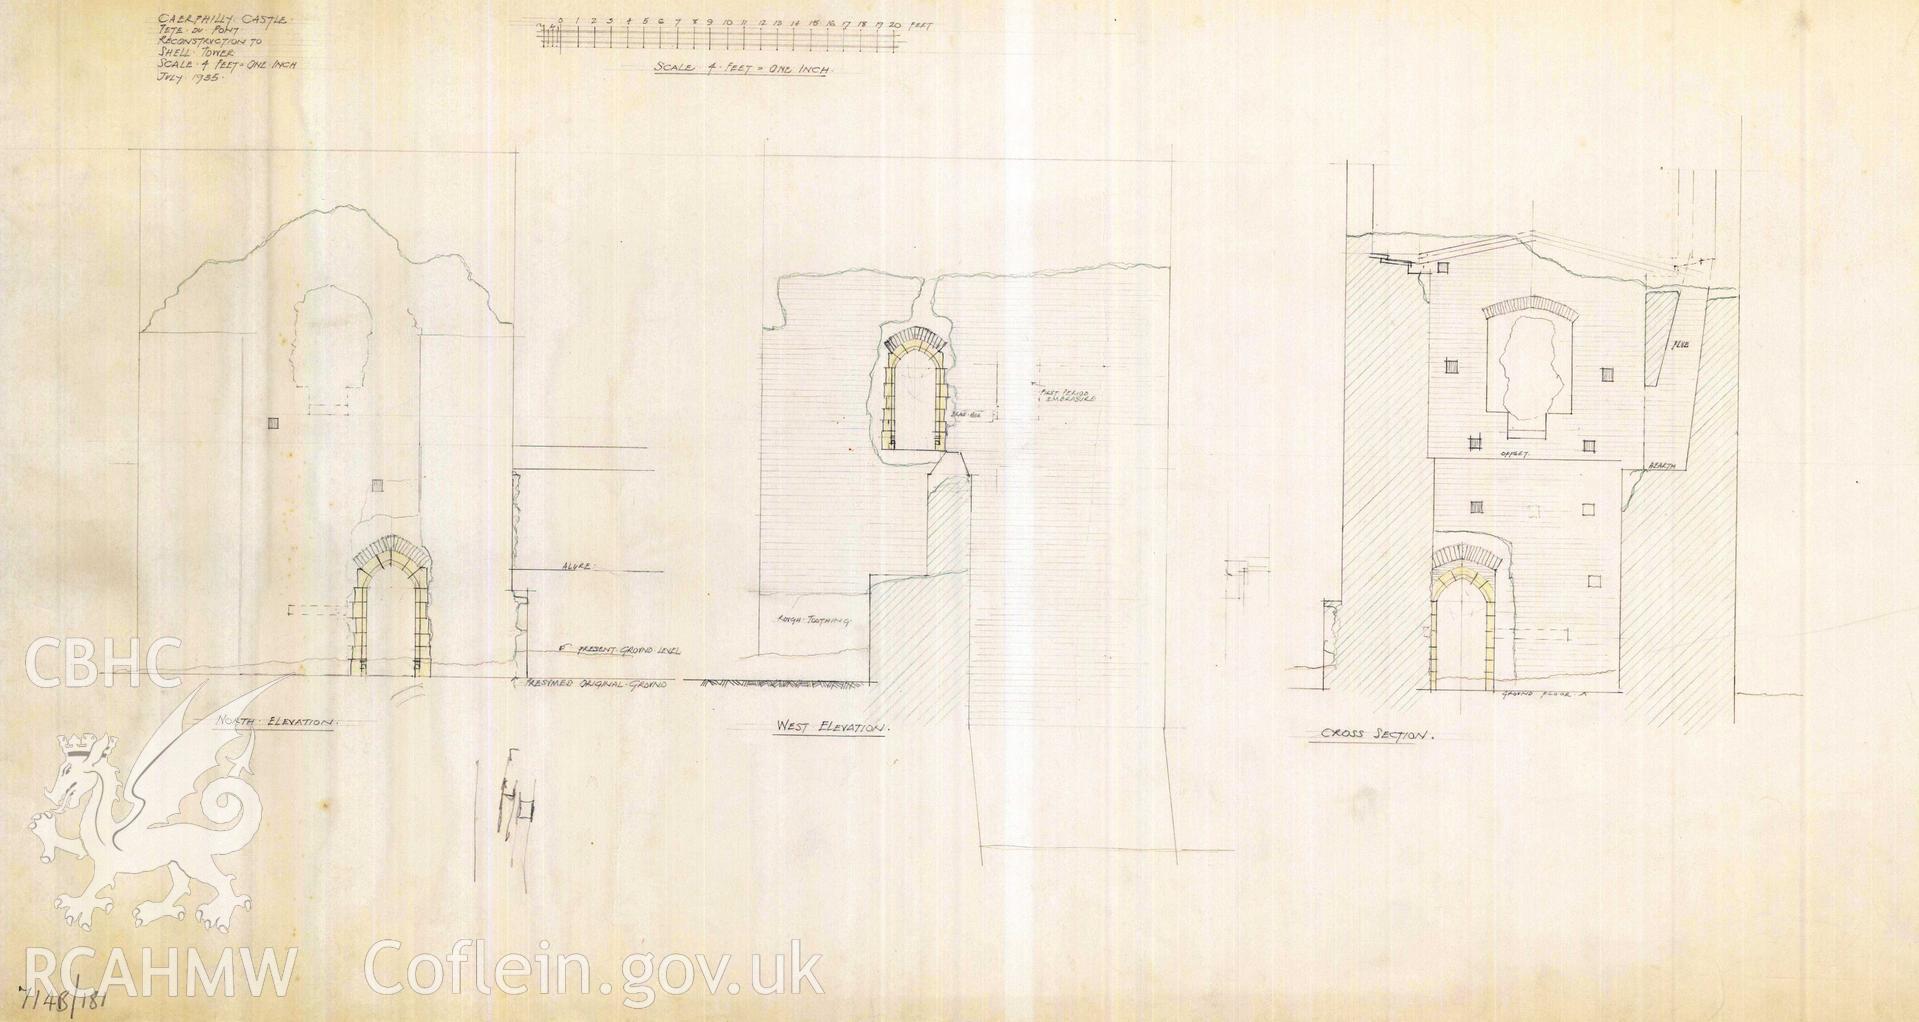 Cadw guardianship monument drawing of Caerphilly Castle. Dam S tower, elevs+ section (ii). Cadw Ref. No:714B/181. Scale 1:48.